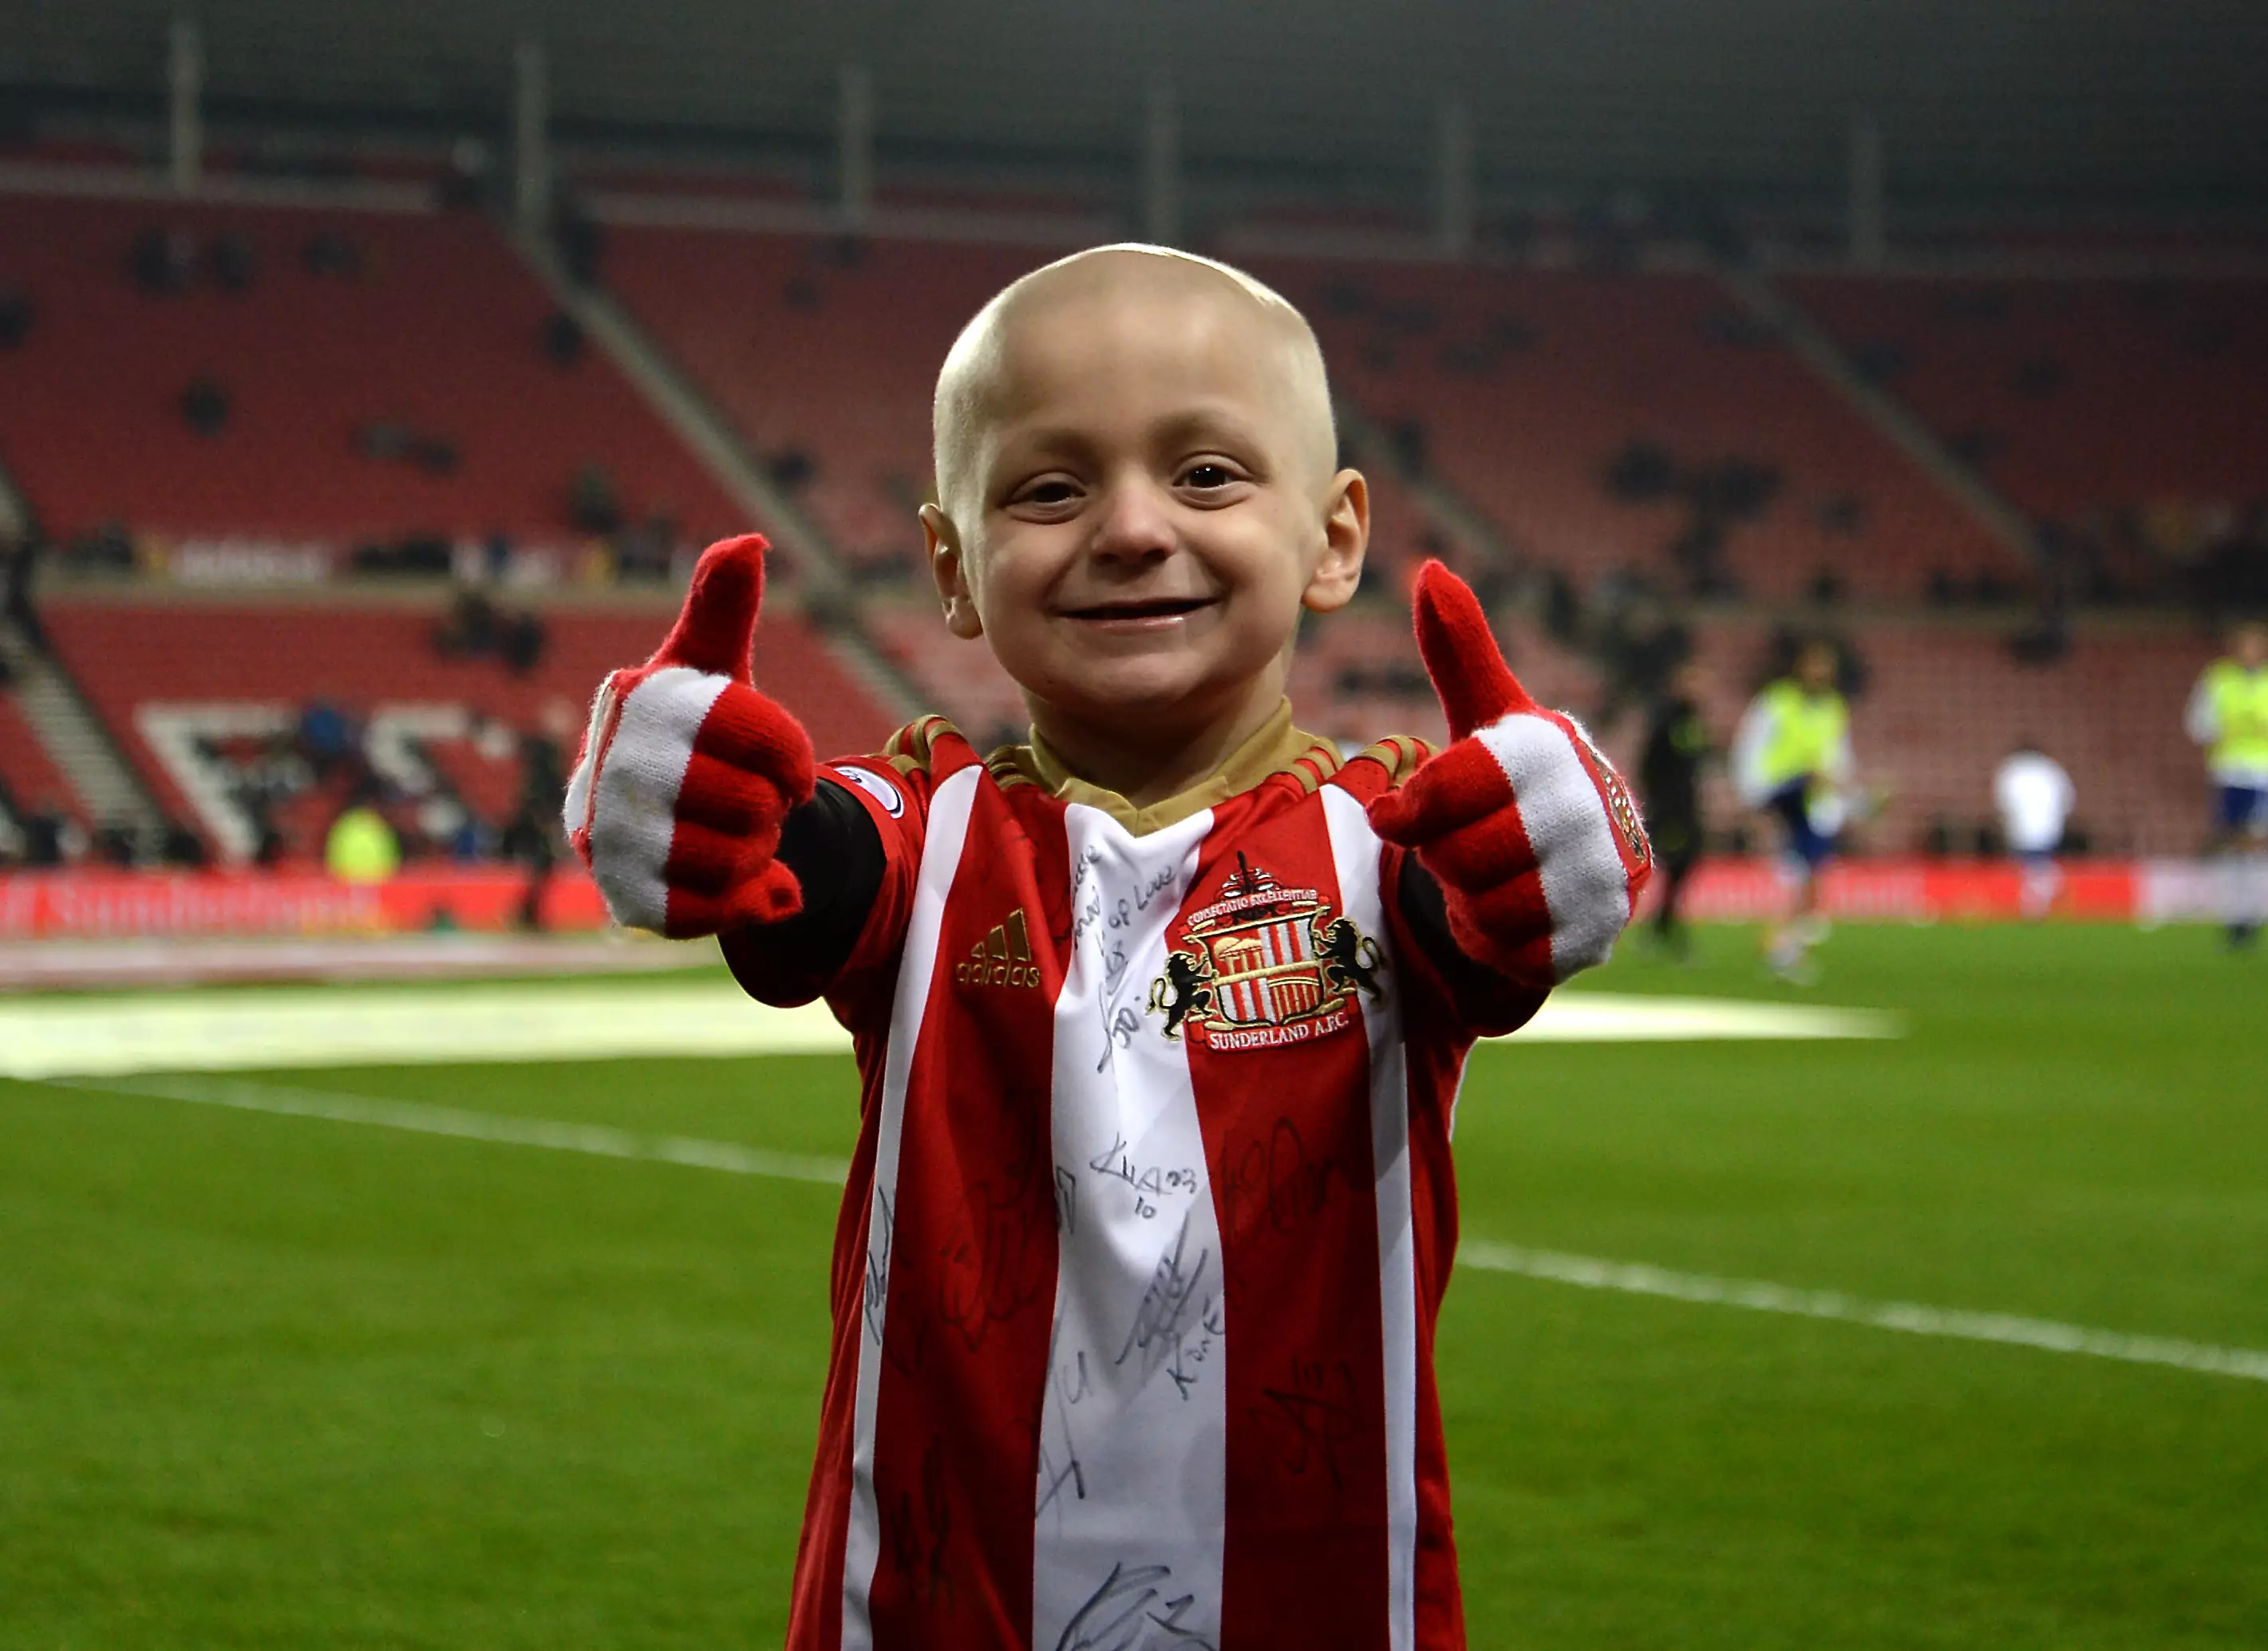 Bradley Lowery To Be England Mascot For Upcoming Lithuania Match